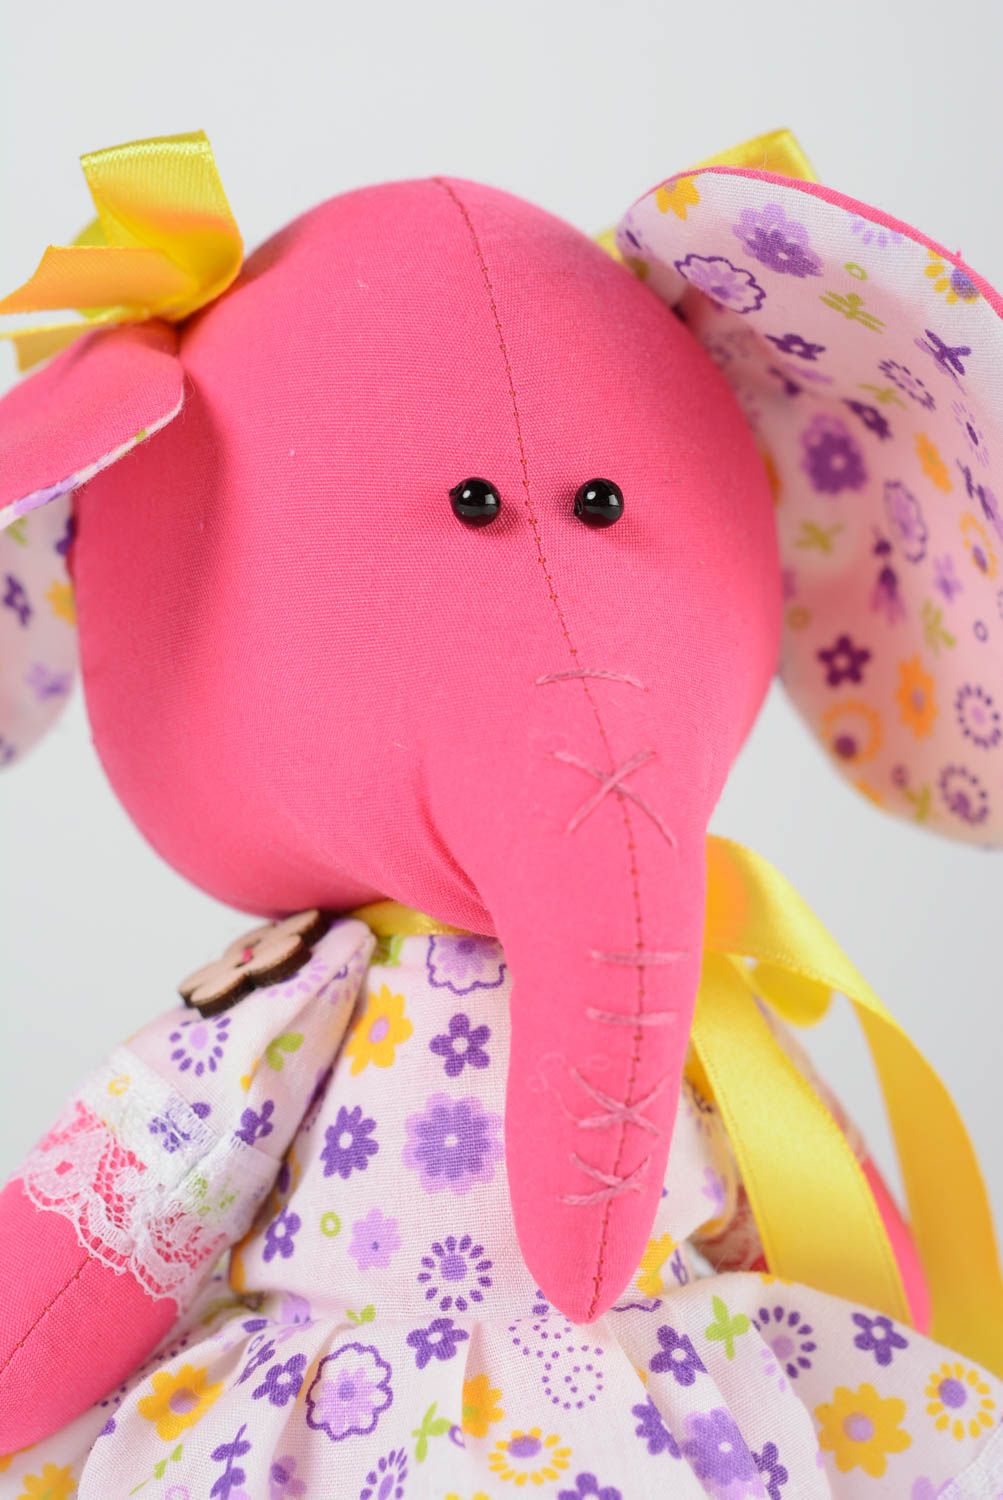 Handmade cotton soft toy pink elephant in floral dress with yellow ribbons photo 3